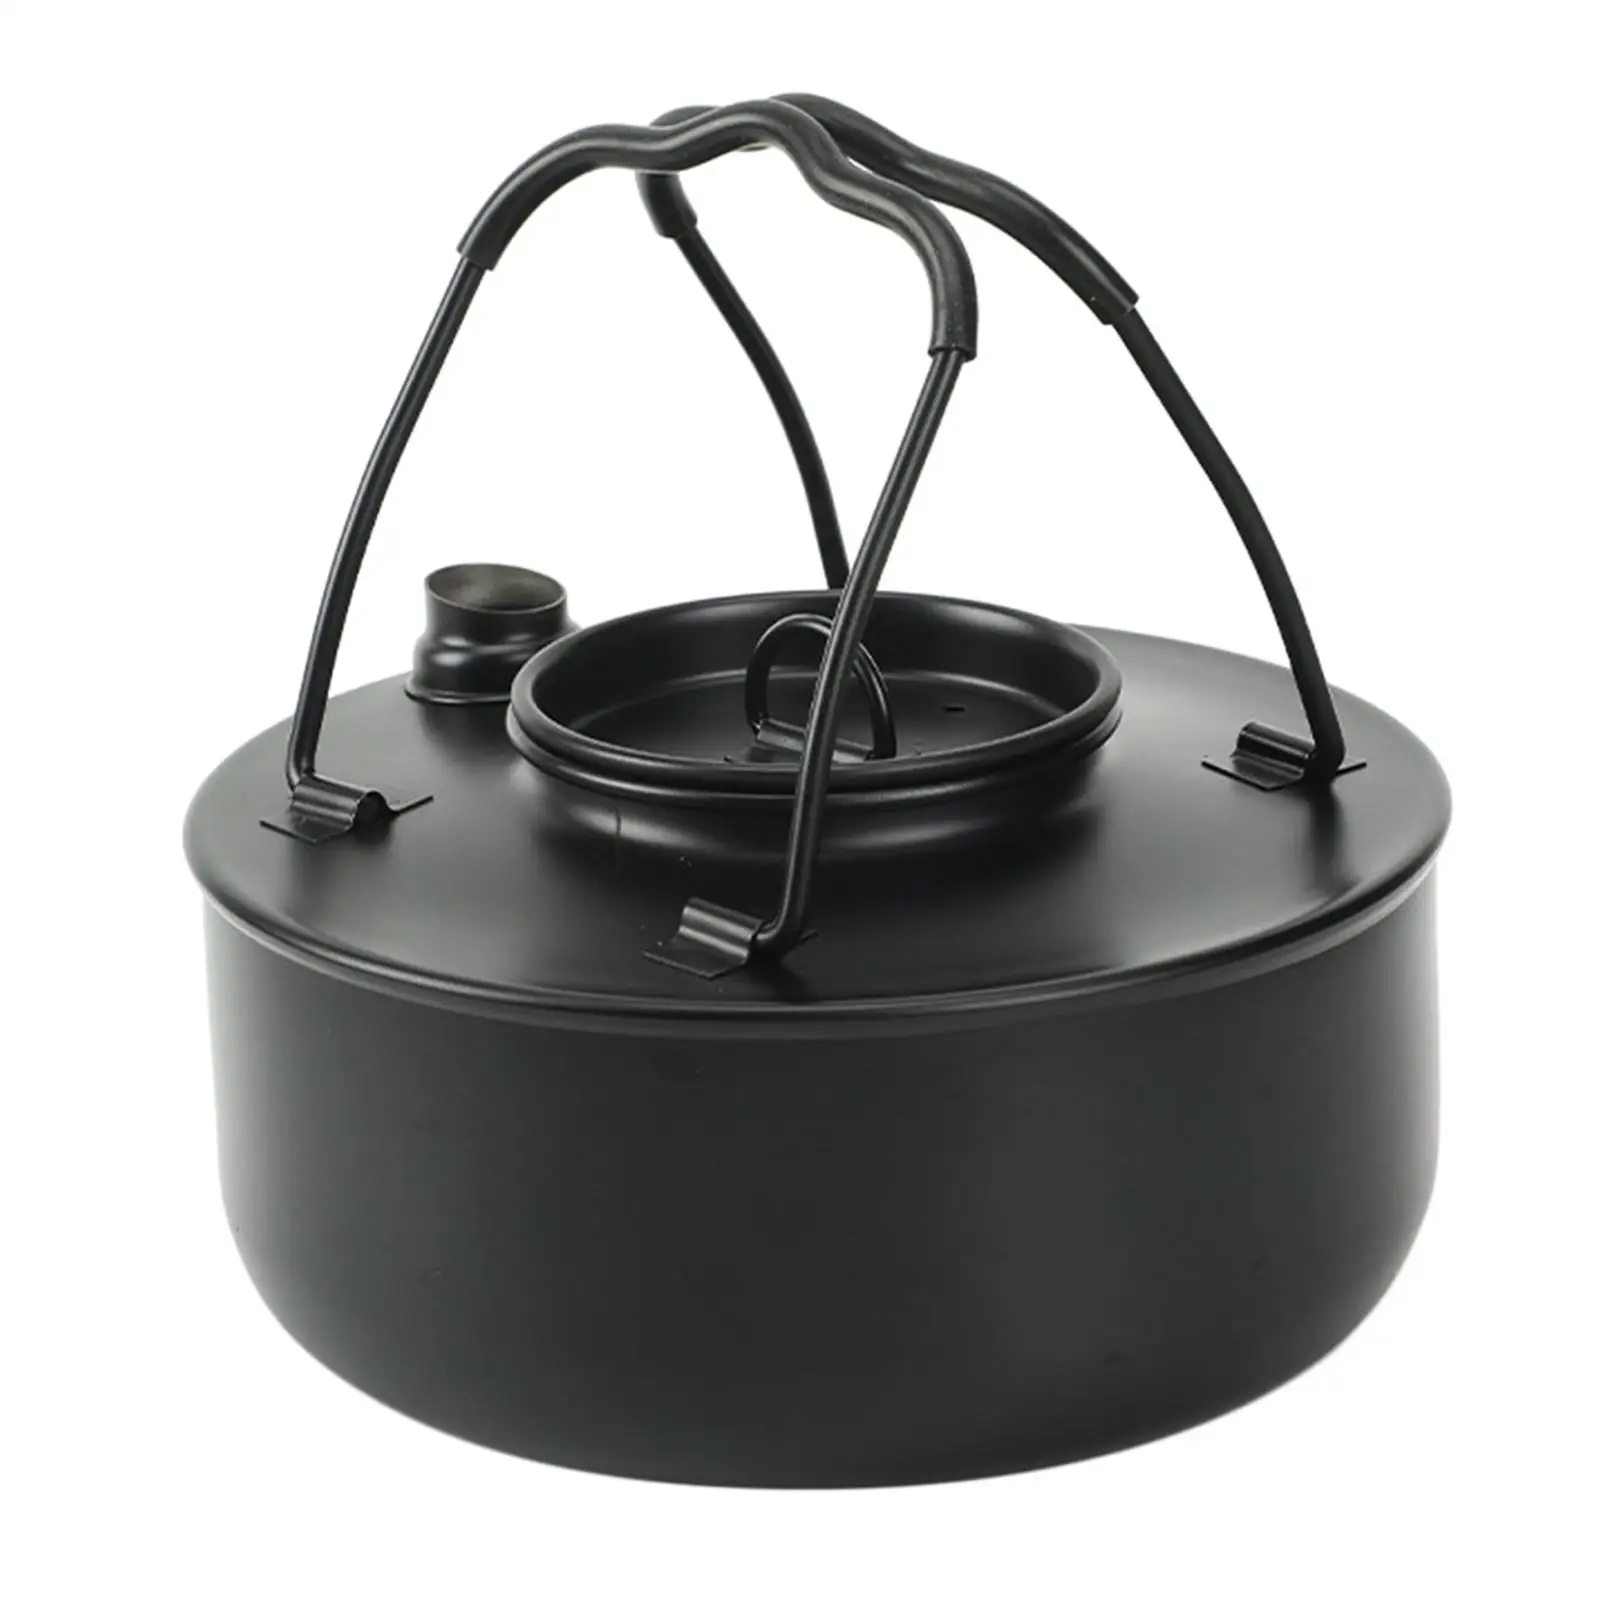 Lightweight Outdoor Stove Pot Teapot Teakettle Backpack Hiking Camp 1.5L Campfire Barbecue Camping Kettle for Cooking Open Fire